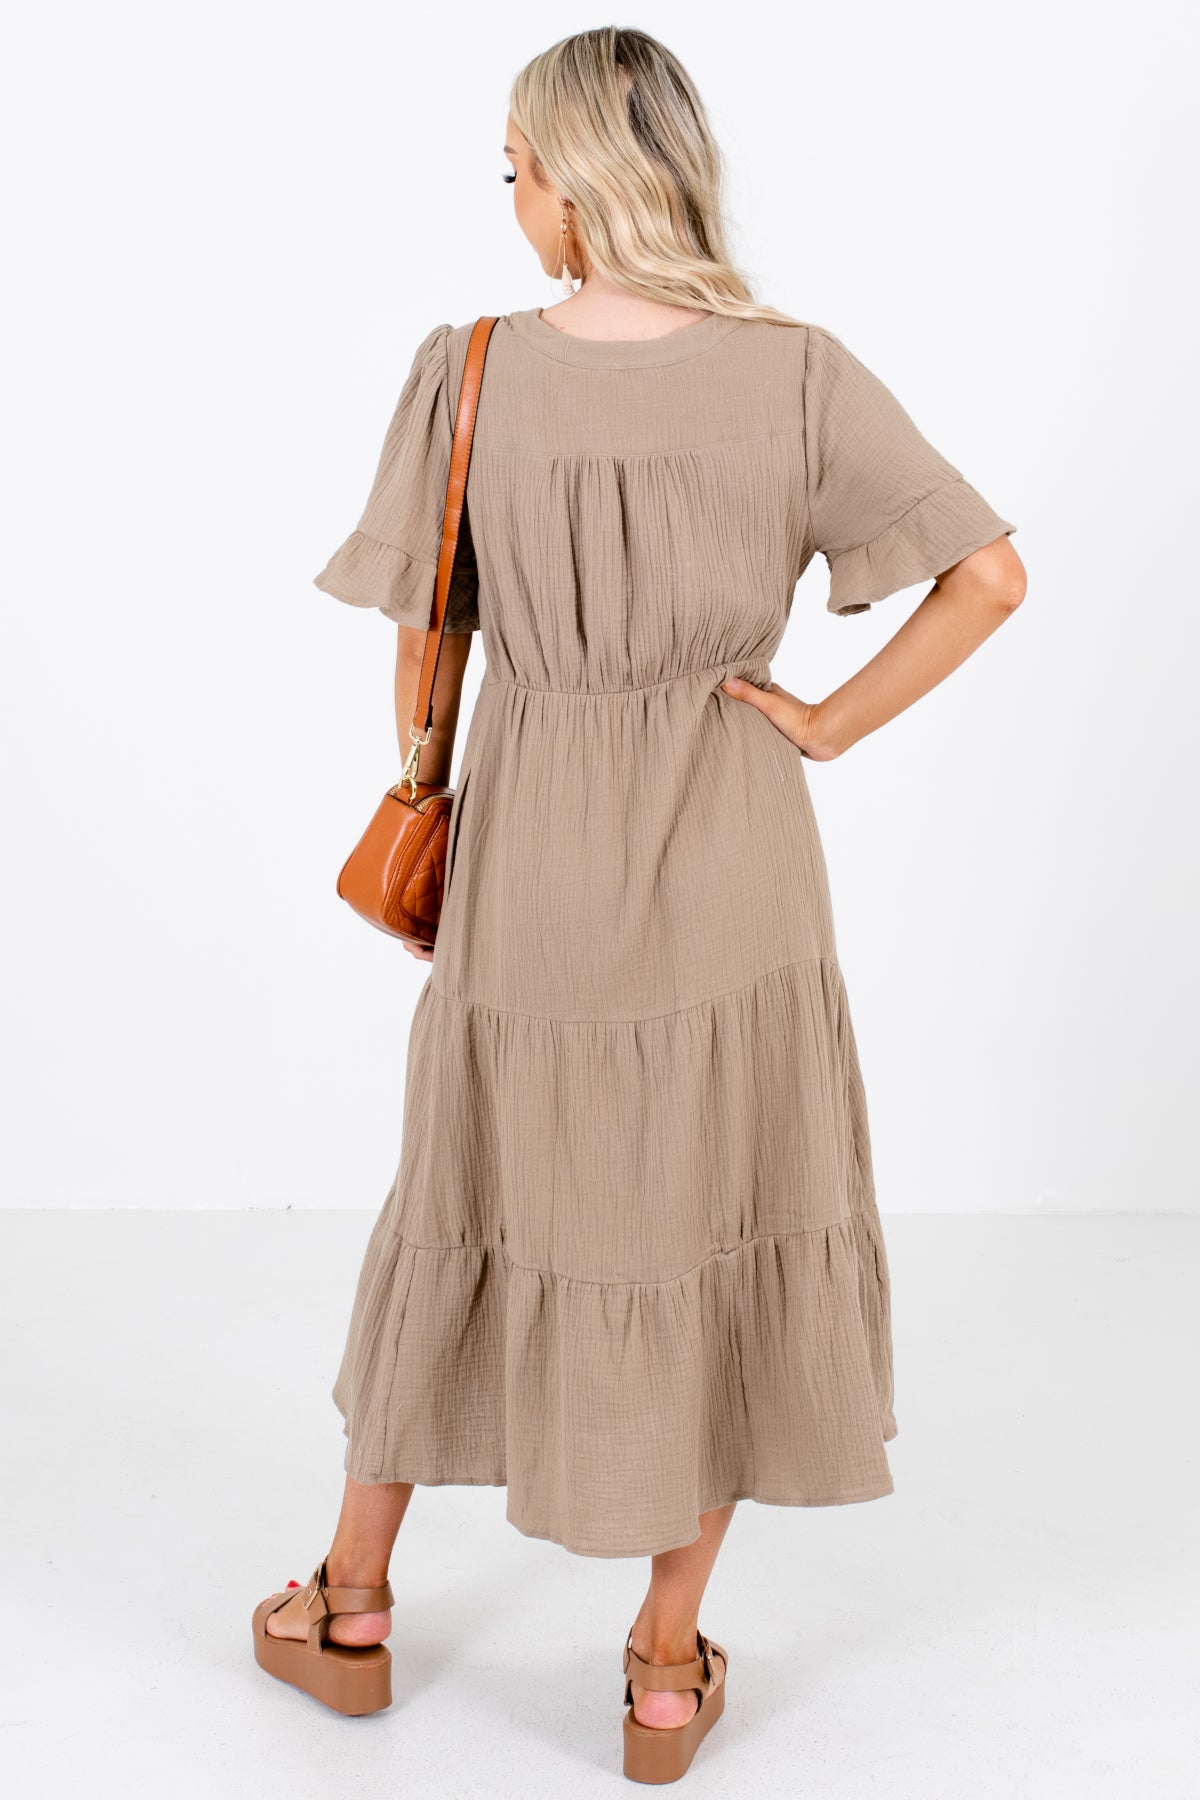 Women's Olive Boutique Midi Dresses with Pockets